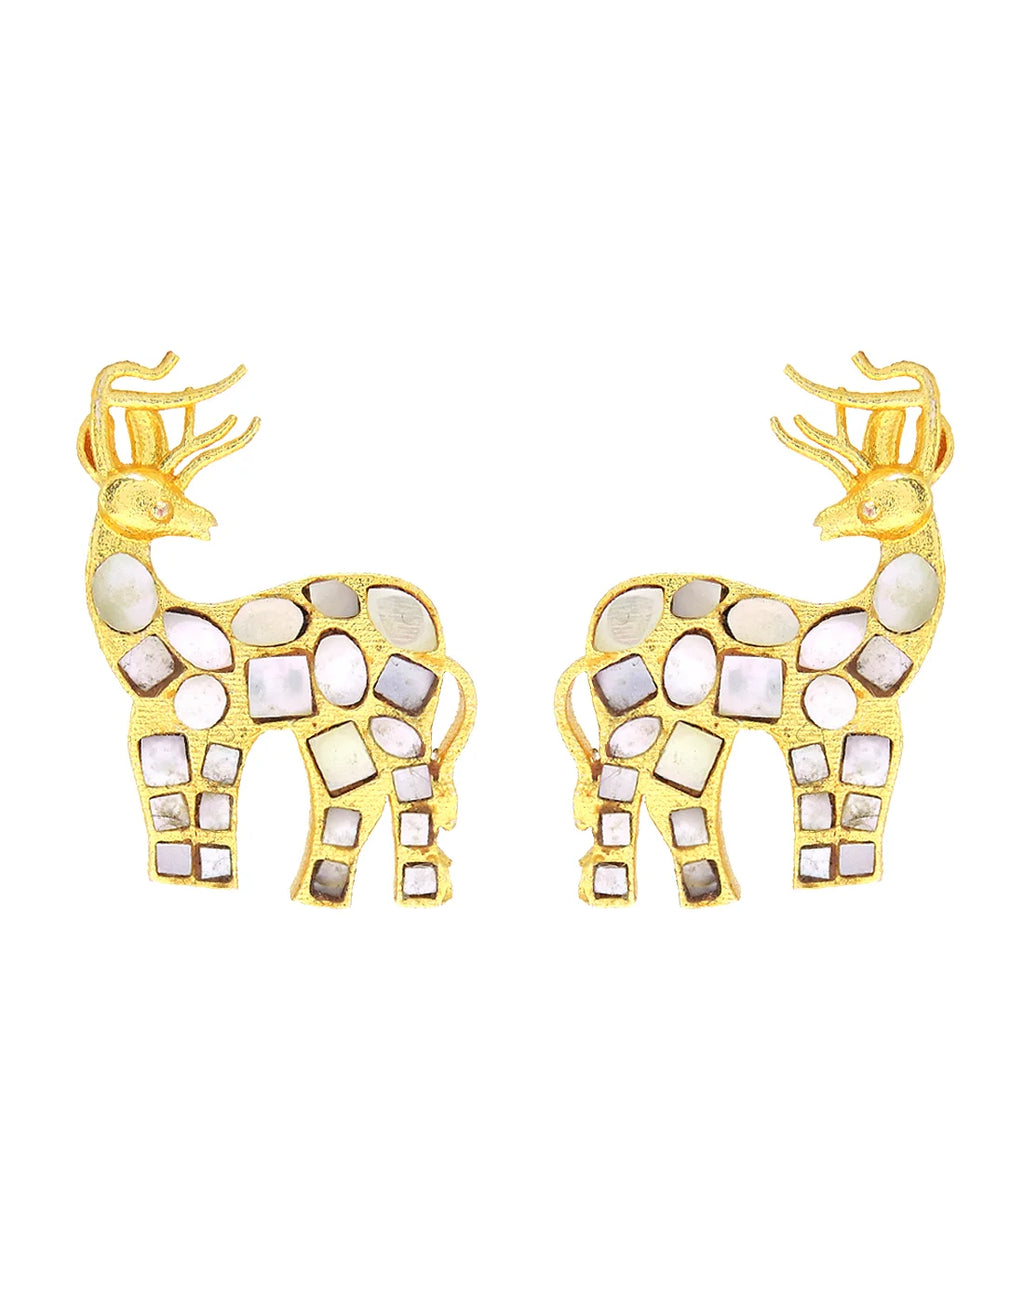 Deer Shell Cluster Earrings- Handcrafted Jewellery from Dori